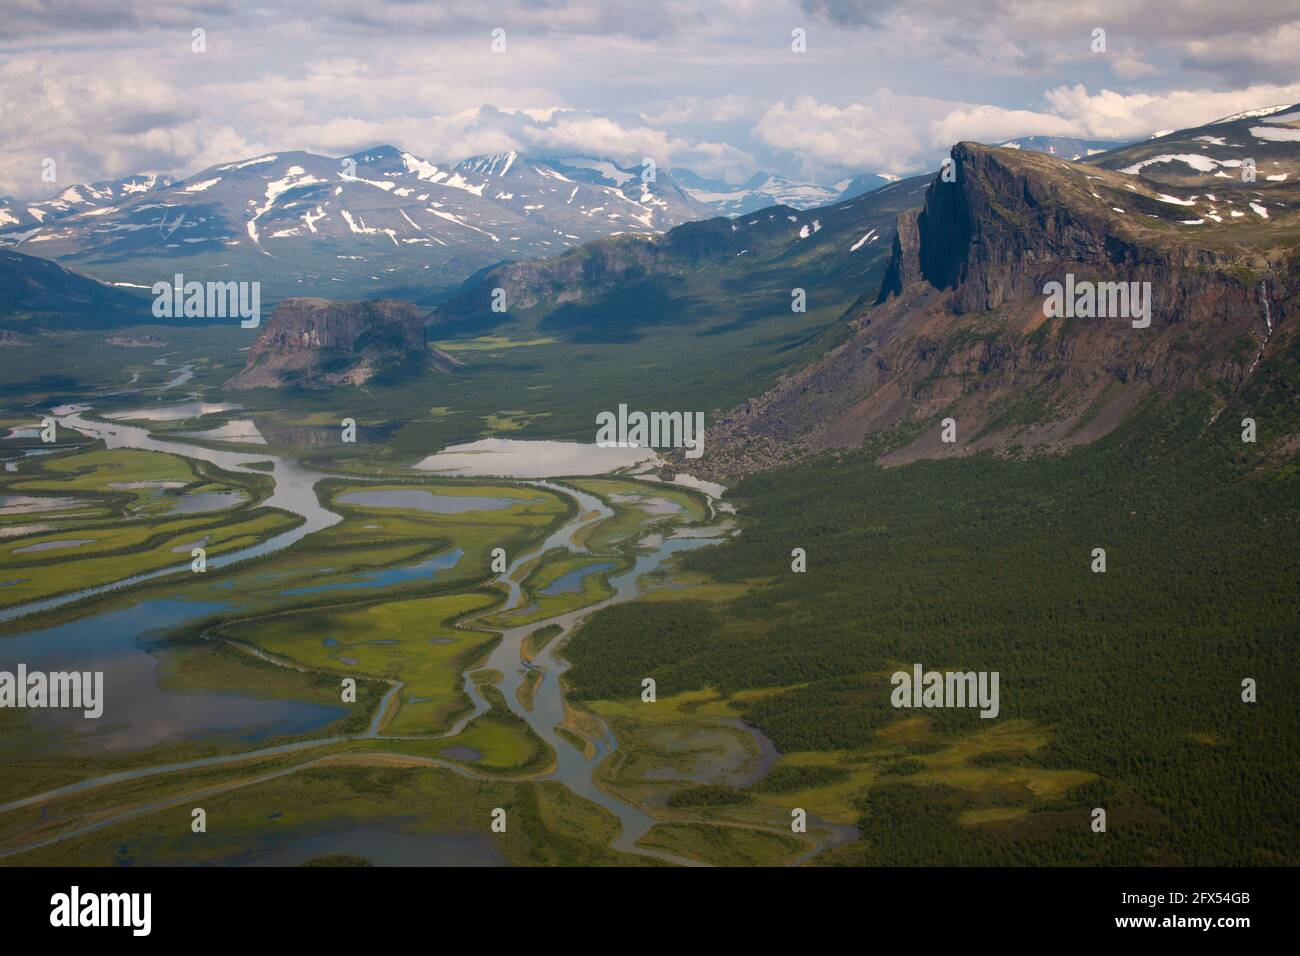 The view of Rapadalen valley and Skierfe mountain top from a helicopter, Sarek National park, Swedish Lapland. Stock Photo